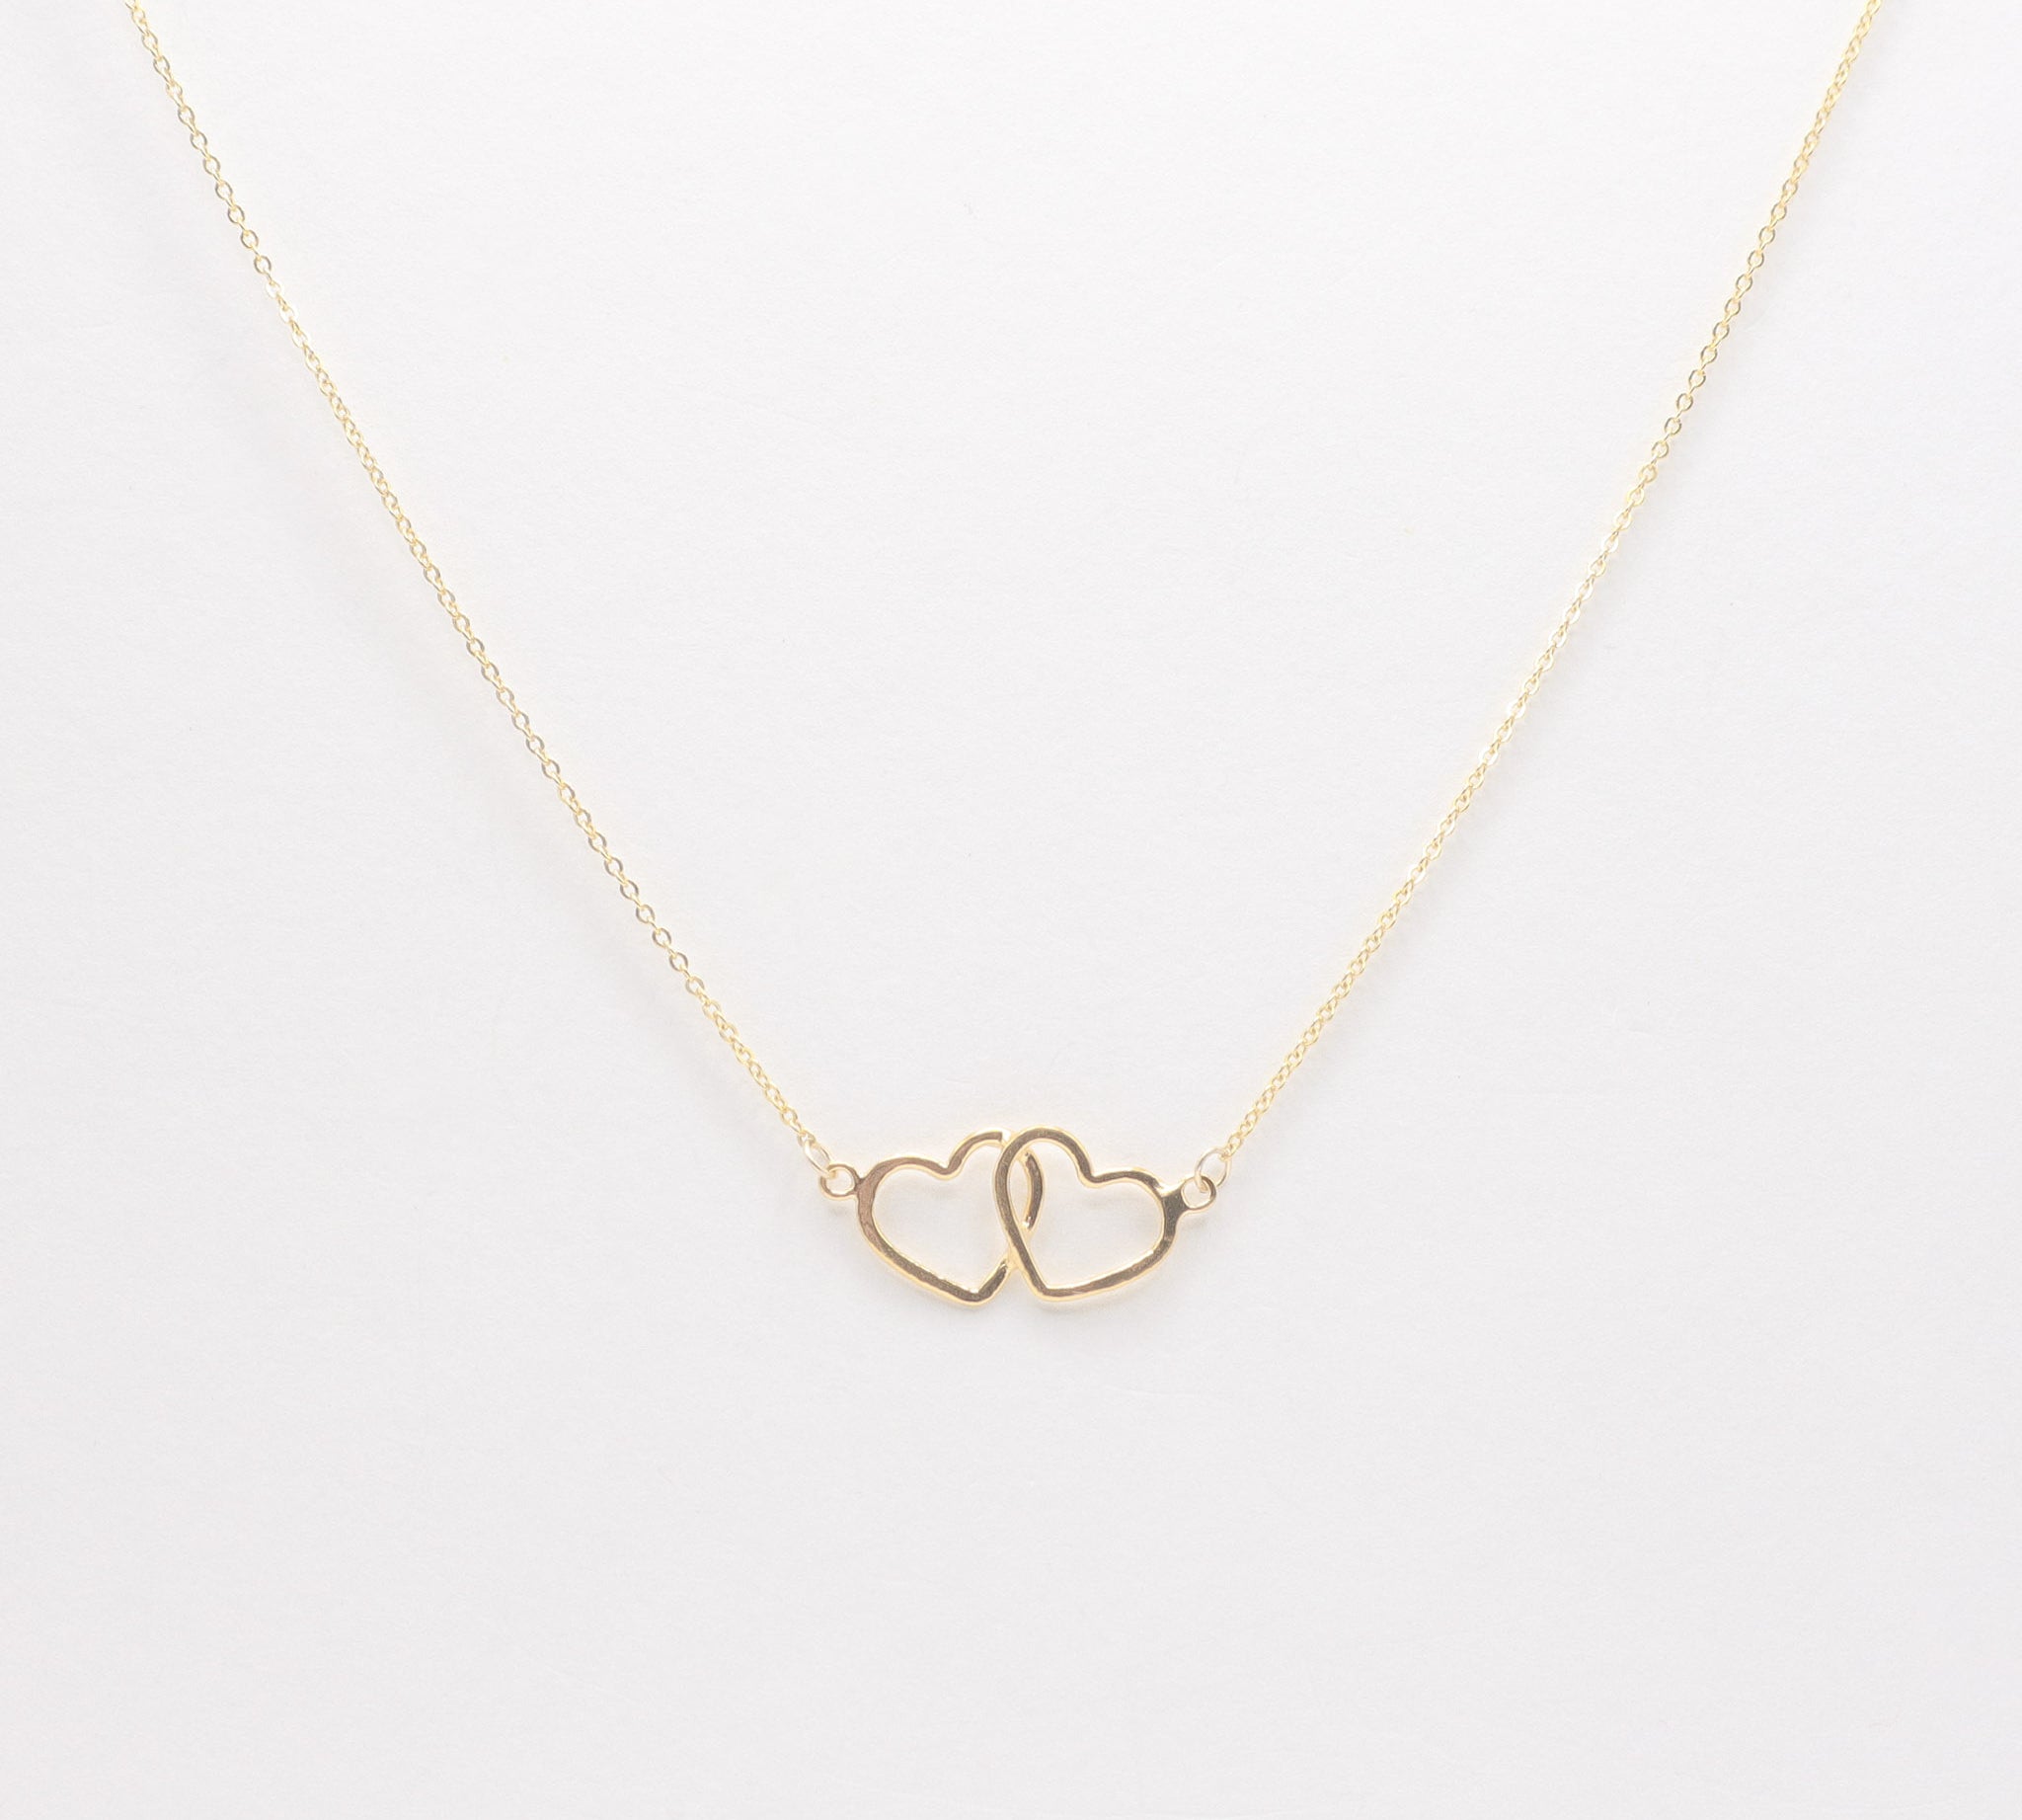 Gold Friendship Necklace, featured image